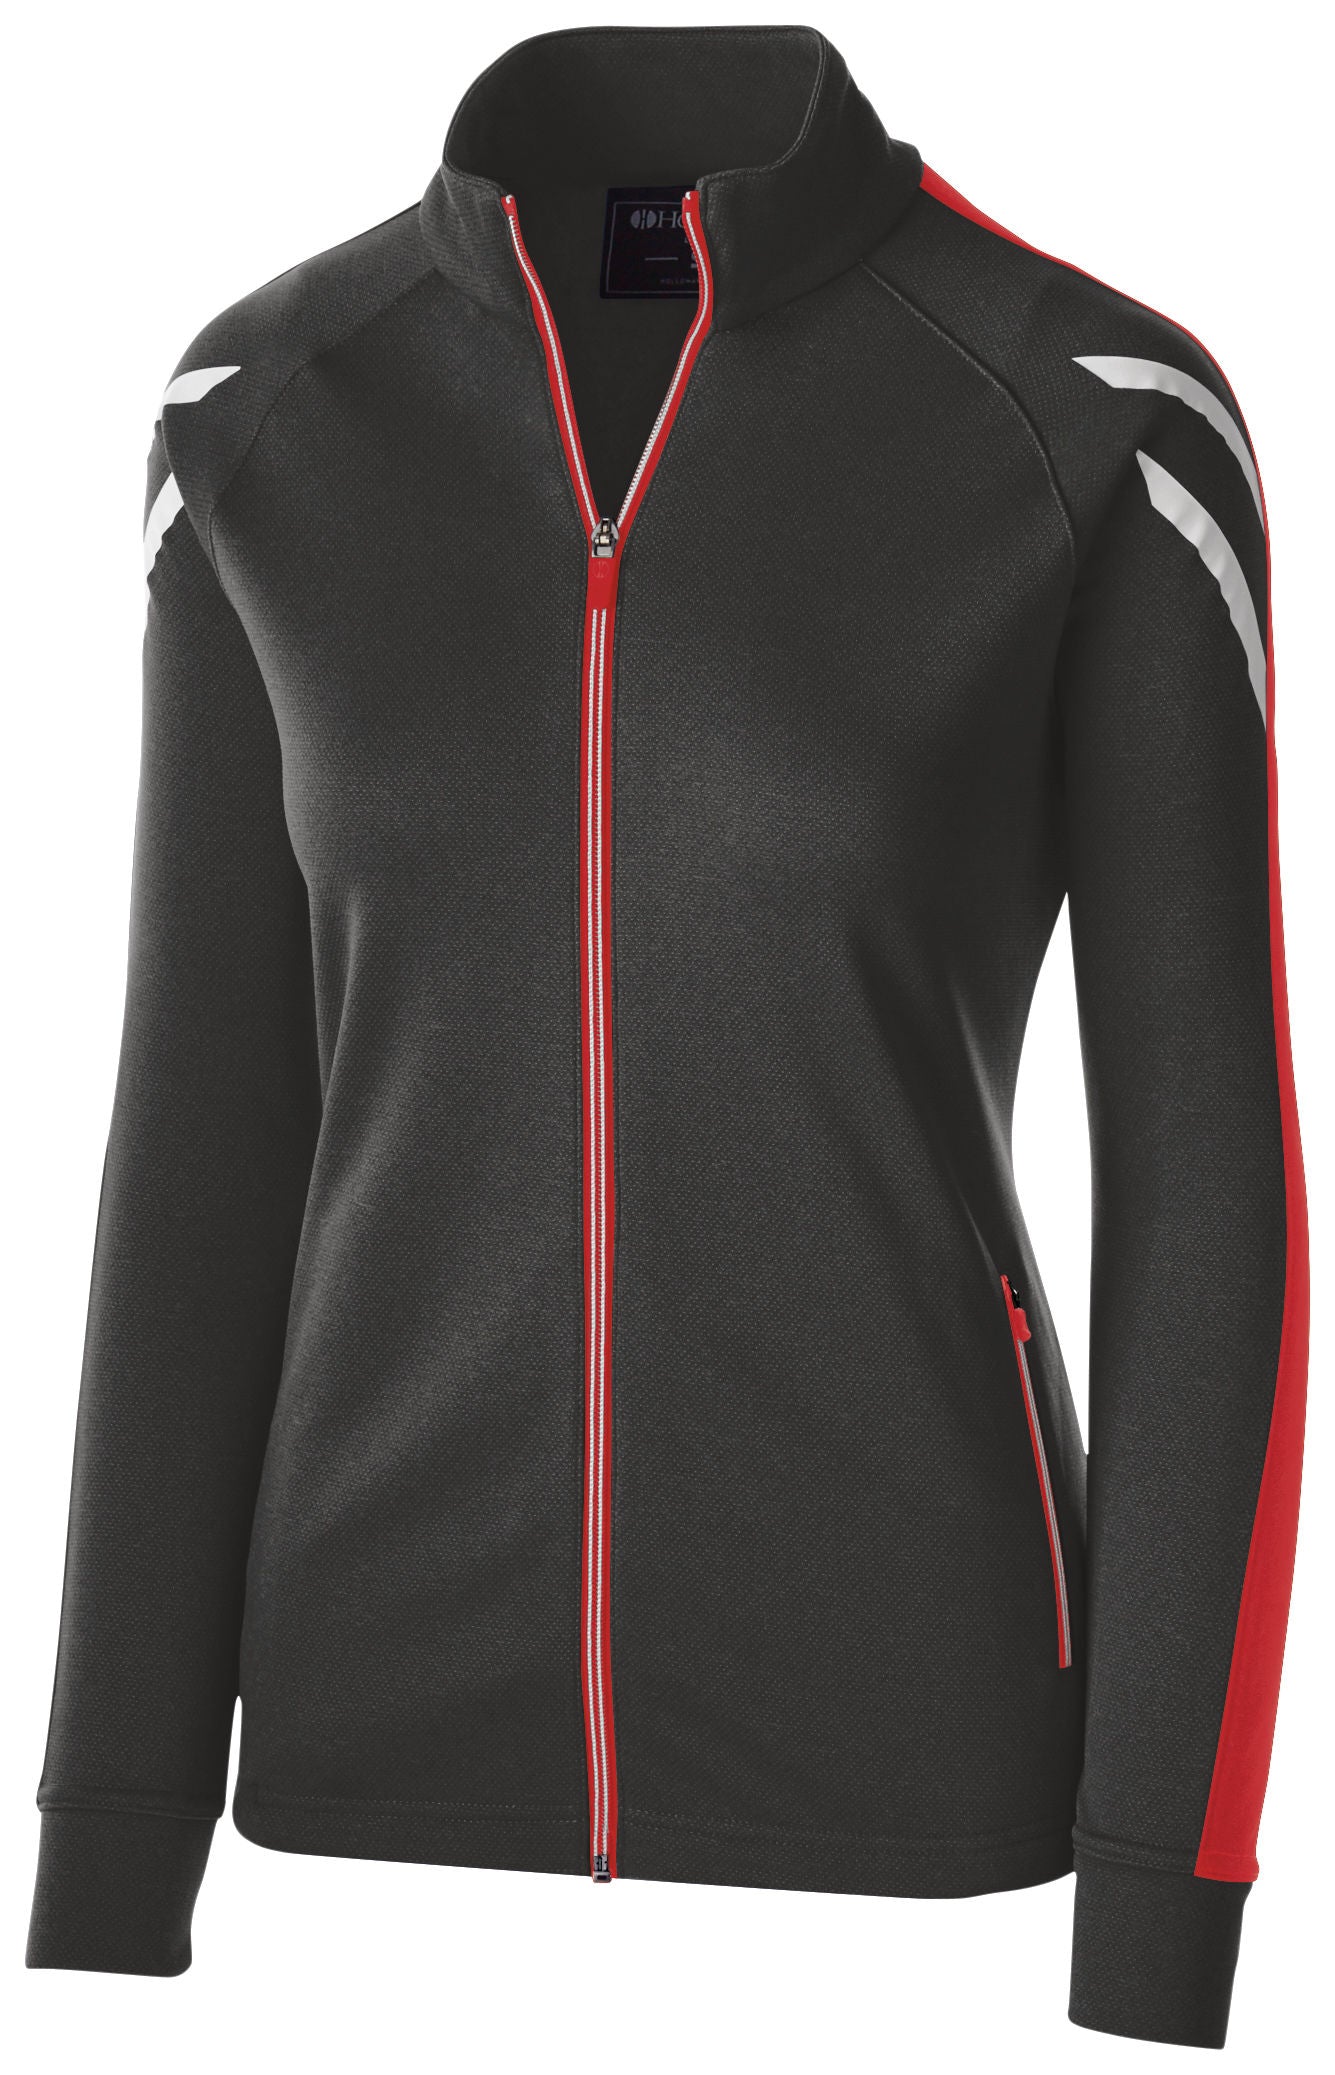 Holloway Ladies Flux Jacket in Black Heather/Scarlet/White  -Part of the Ladies, Ladies-Jacket, Holloway, Outerwear, Flux-Collection, Corporate-Collection product lines at KanaleyCreations.com